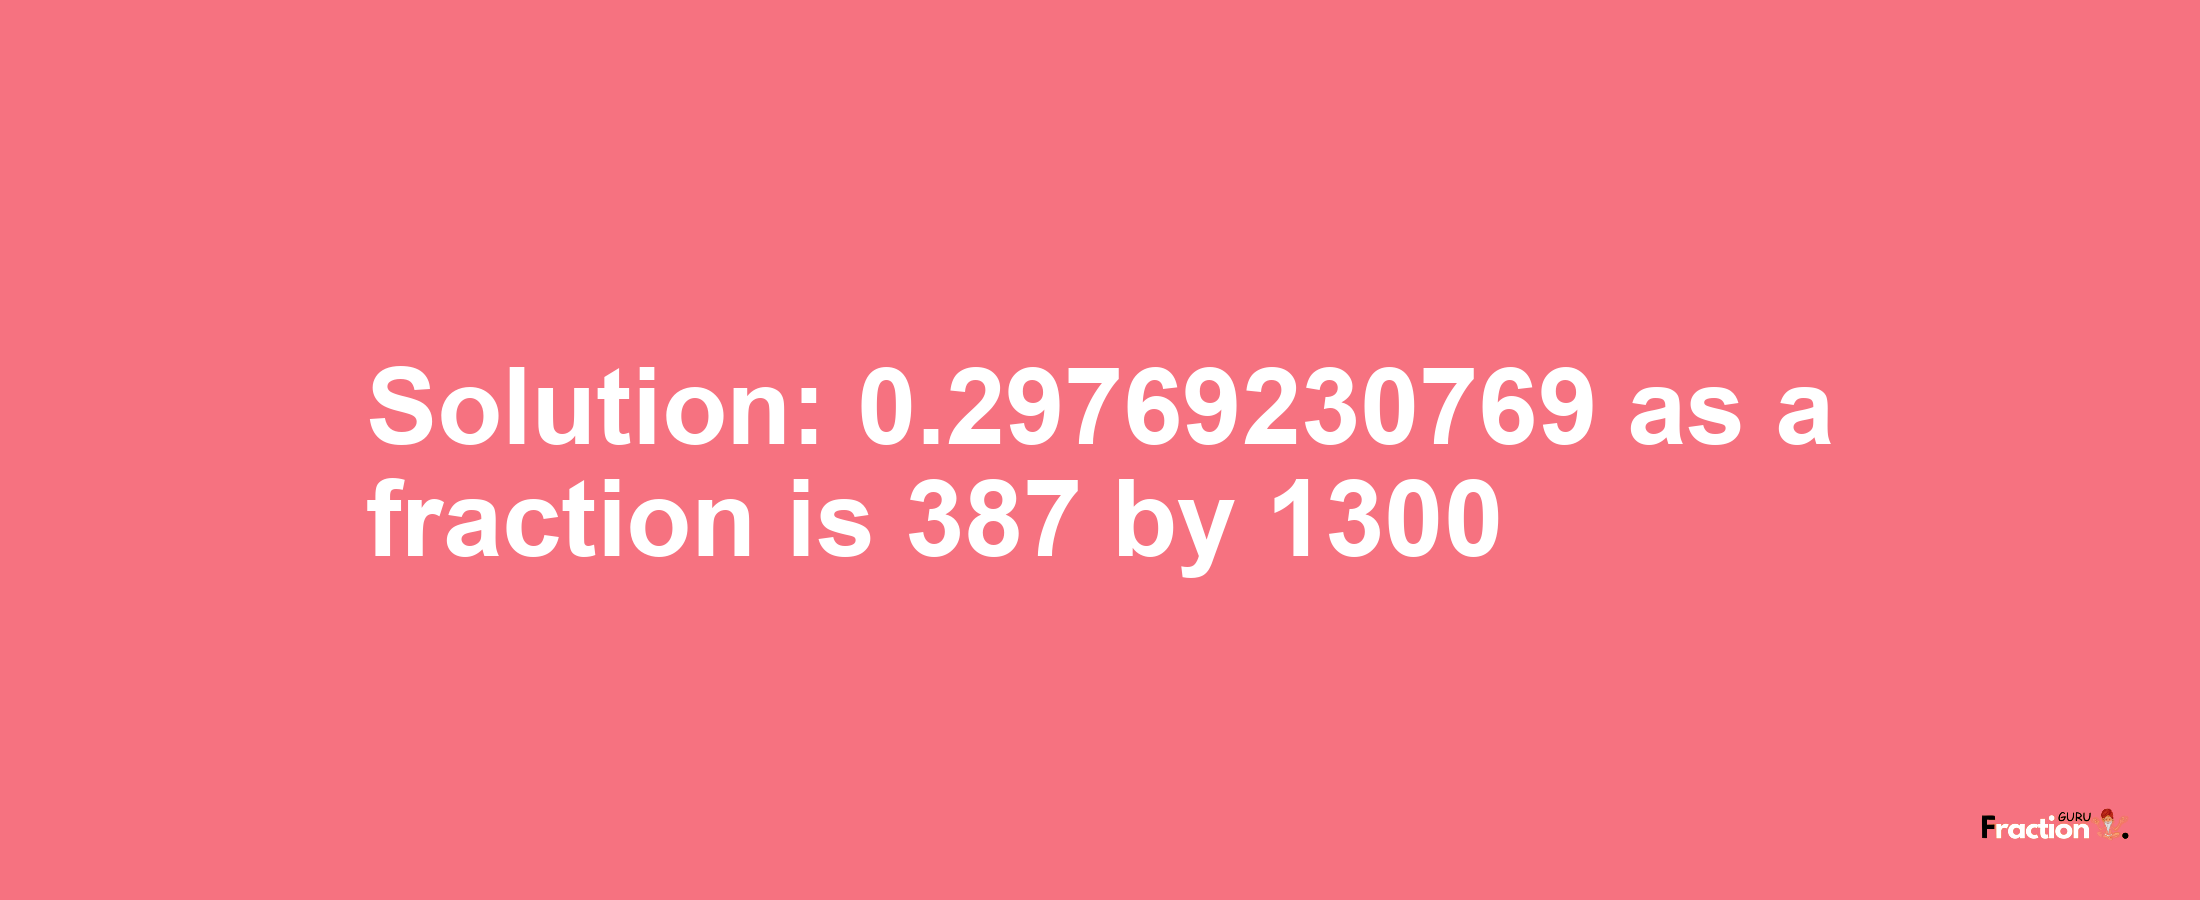 Solution:0.29769230769 as a fraction is 387/1300